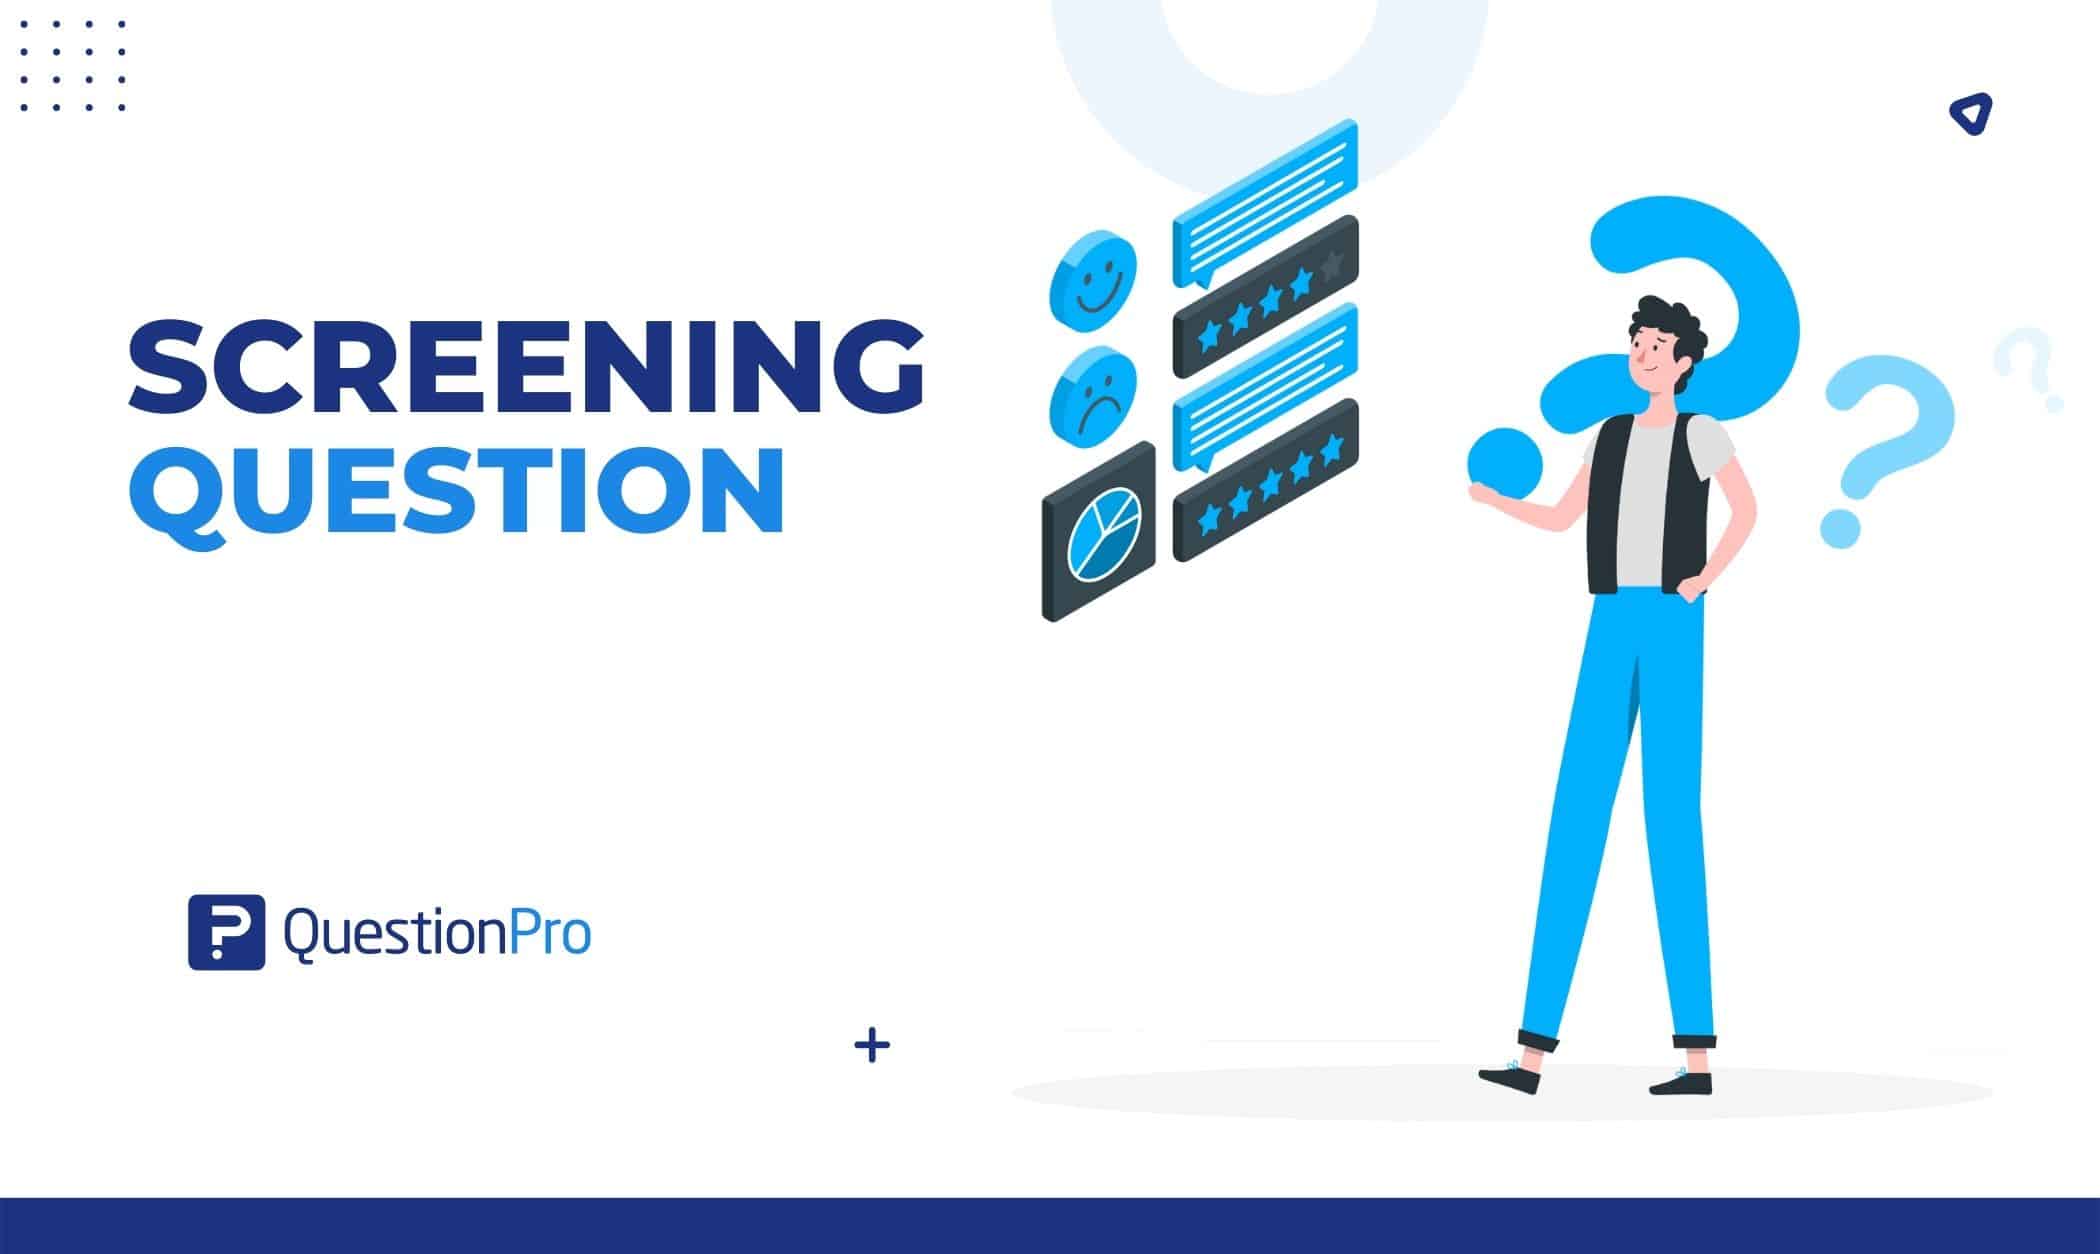 A response to a screening question determines whether or not they are eligible to participate in your survey. Learn everything about it here.